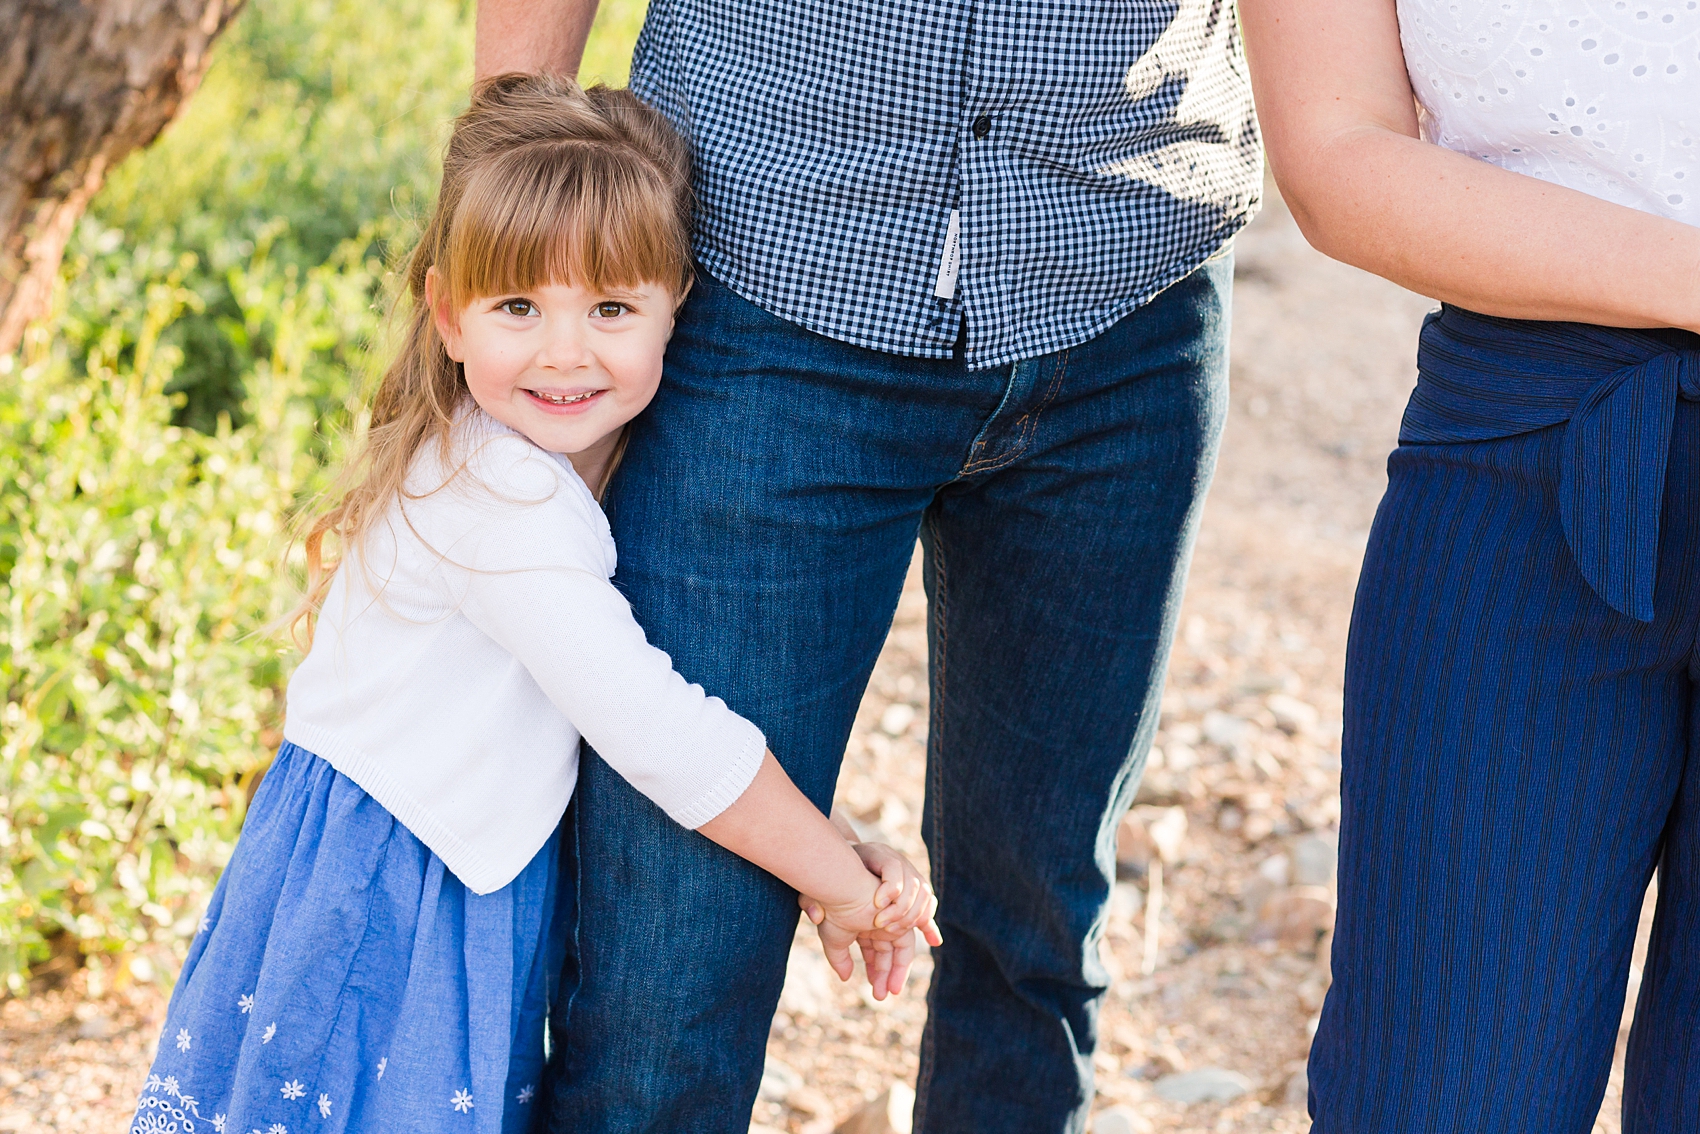 Leah Hope Photography | Scottsdale Phoenix Arizona Photographer | Paradise Valley Home | Family Pictures | Child Family Photos | What to Wear | Family Poses